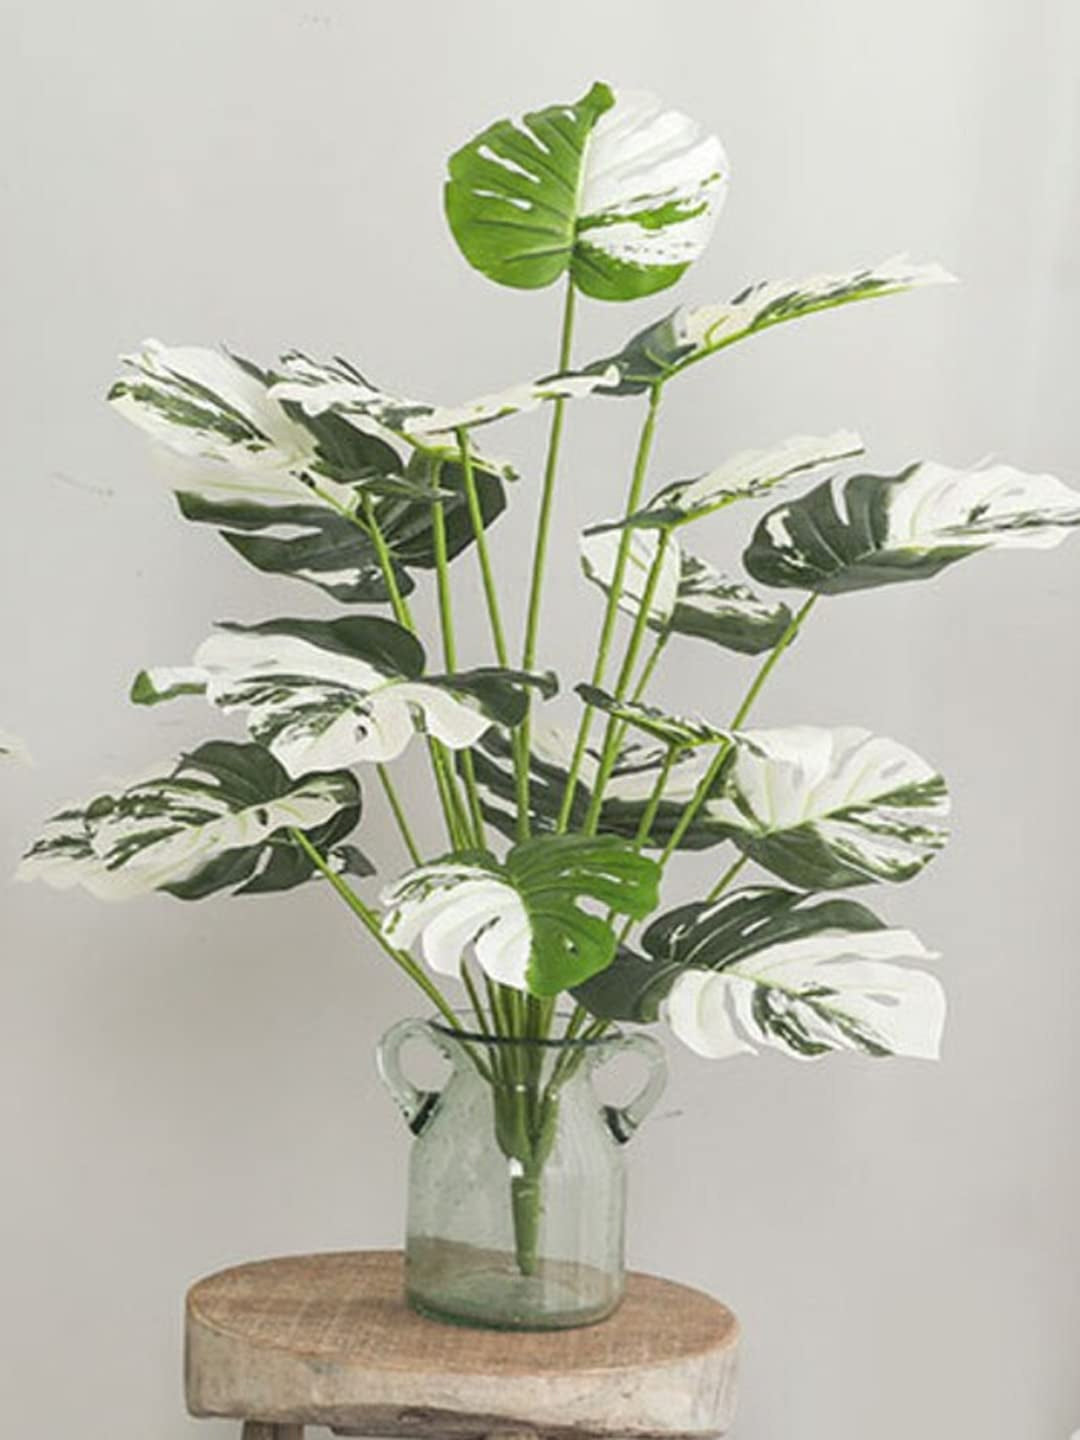 Artificial Monstera Plant for Home, Office Decor Ornamental Plant for Interior Decor/Home Decor/Office Décor (18 Medium Size Leaves Plant, 75 cm Tall)